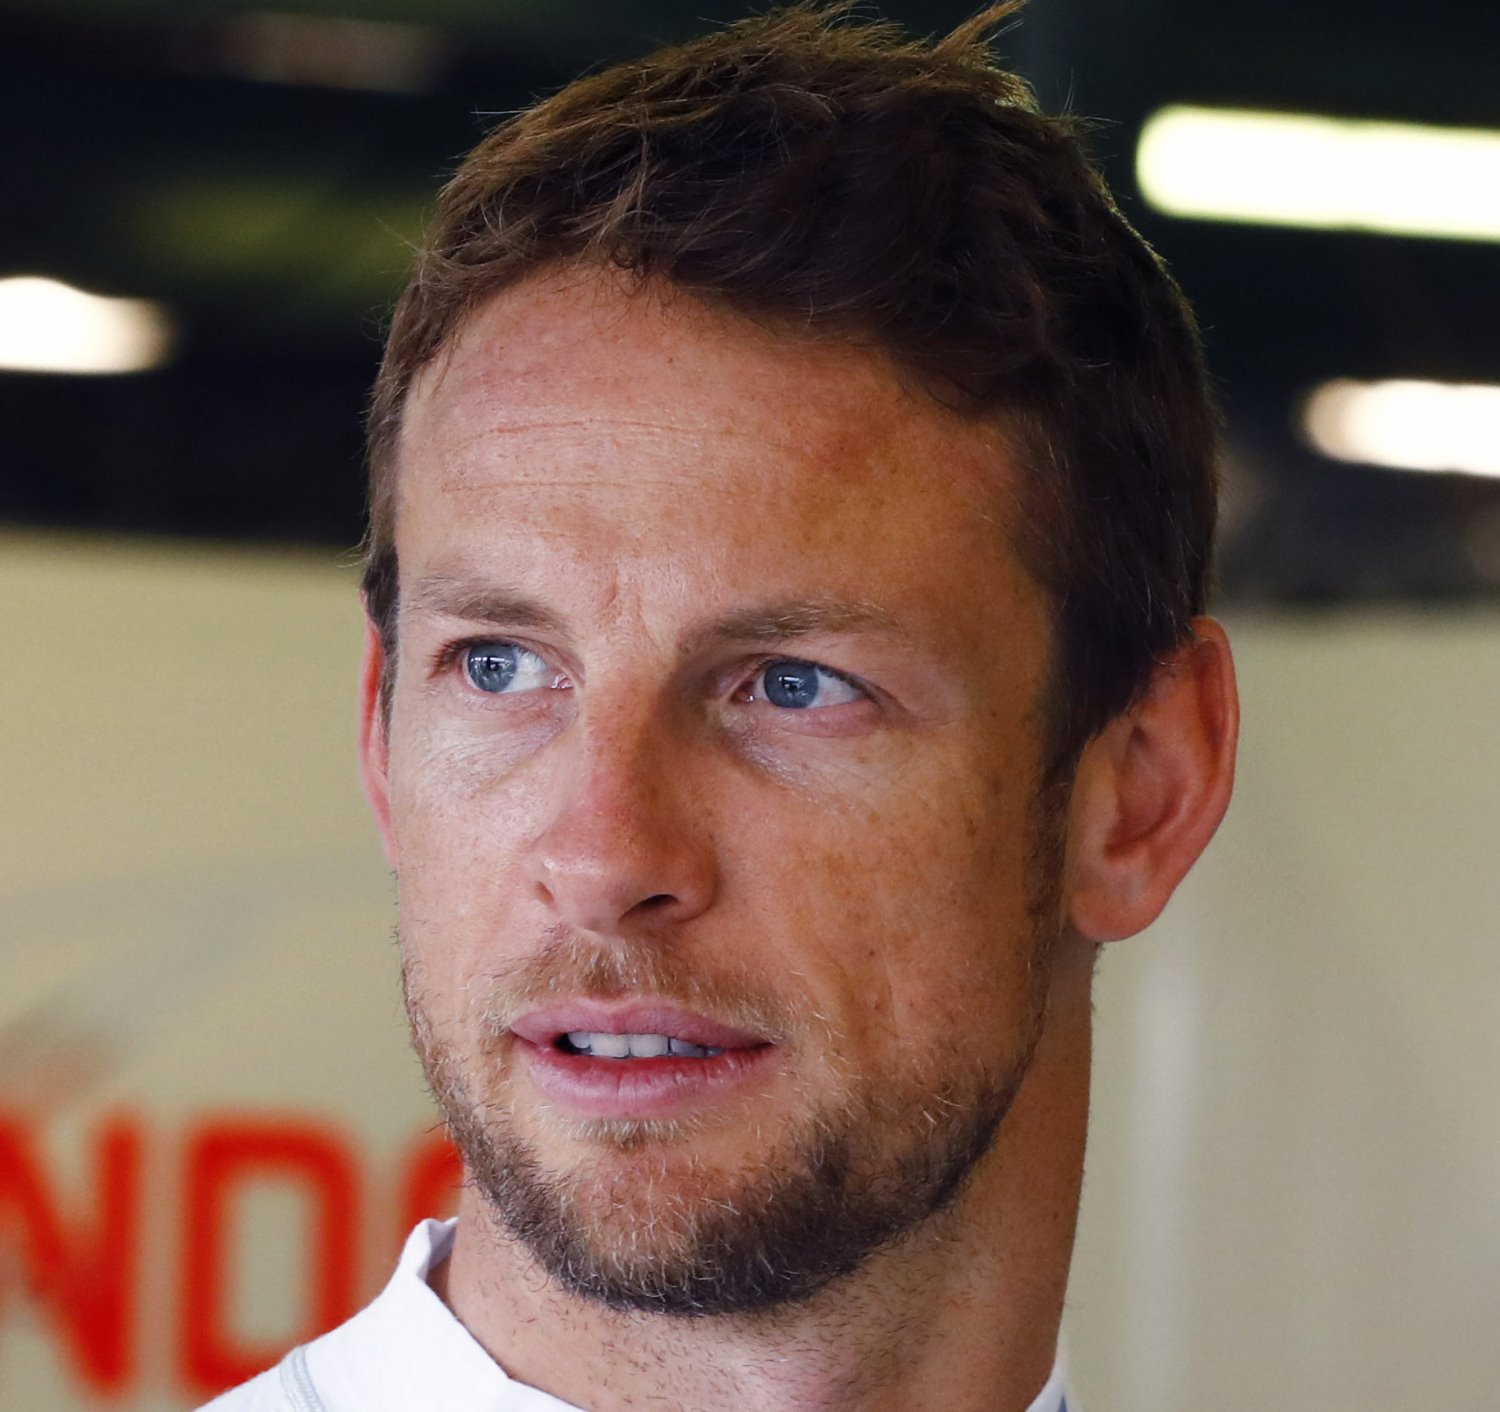 Will Button really return?